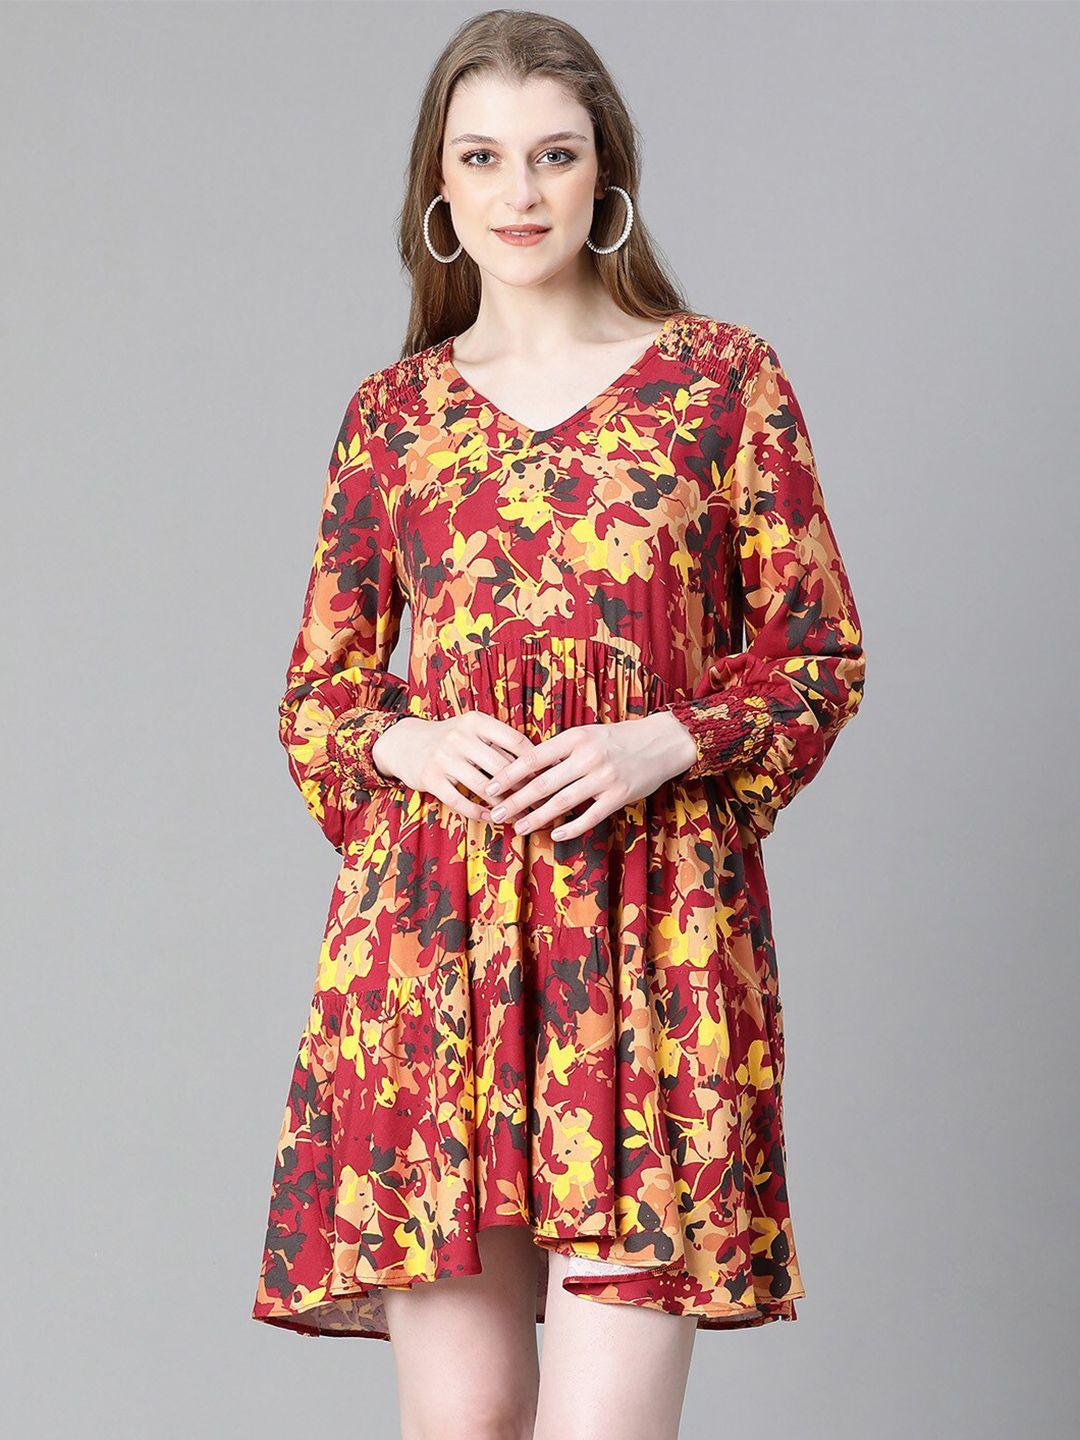 oxolloxo floral printed puffed sleeves gathered or pleated empire mini dress